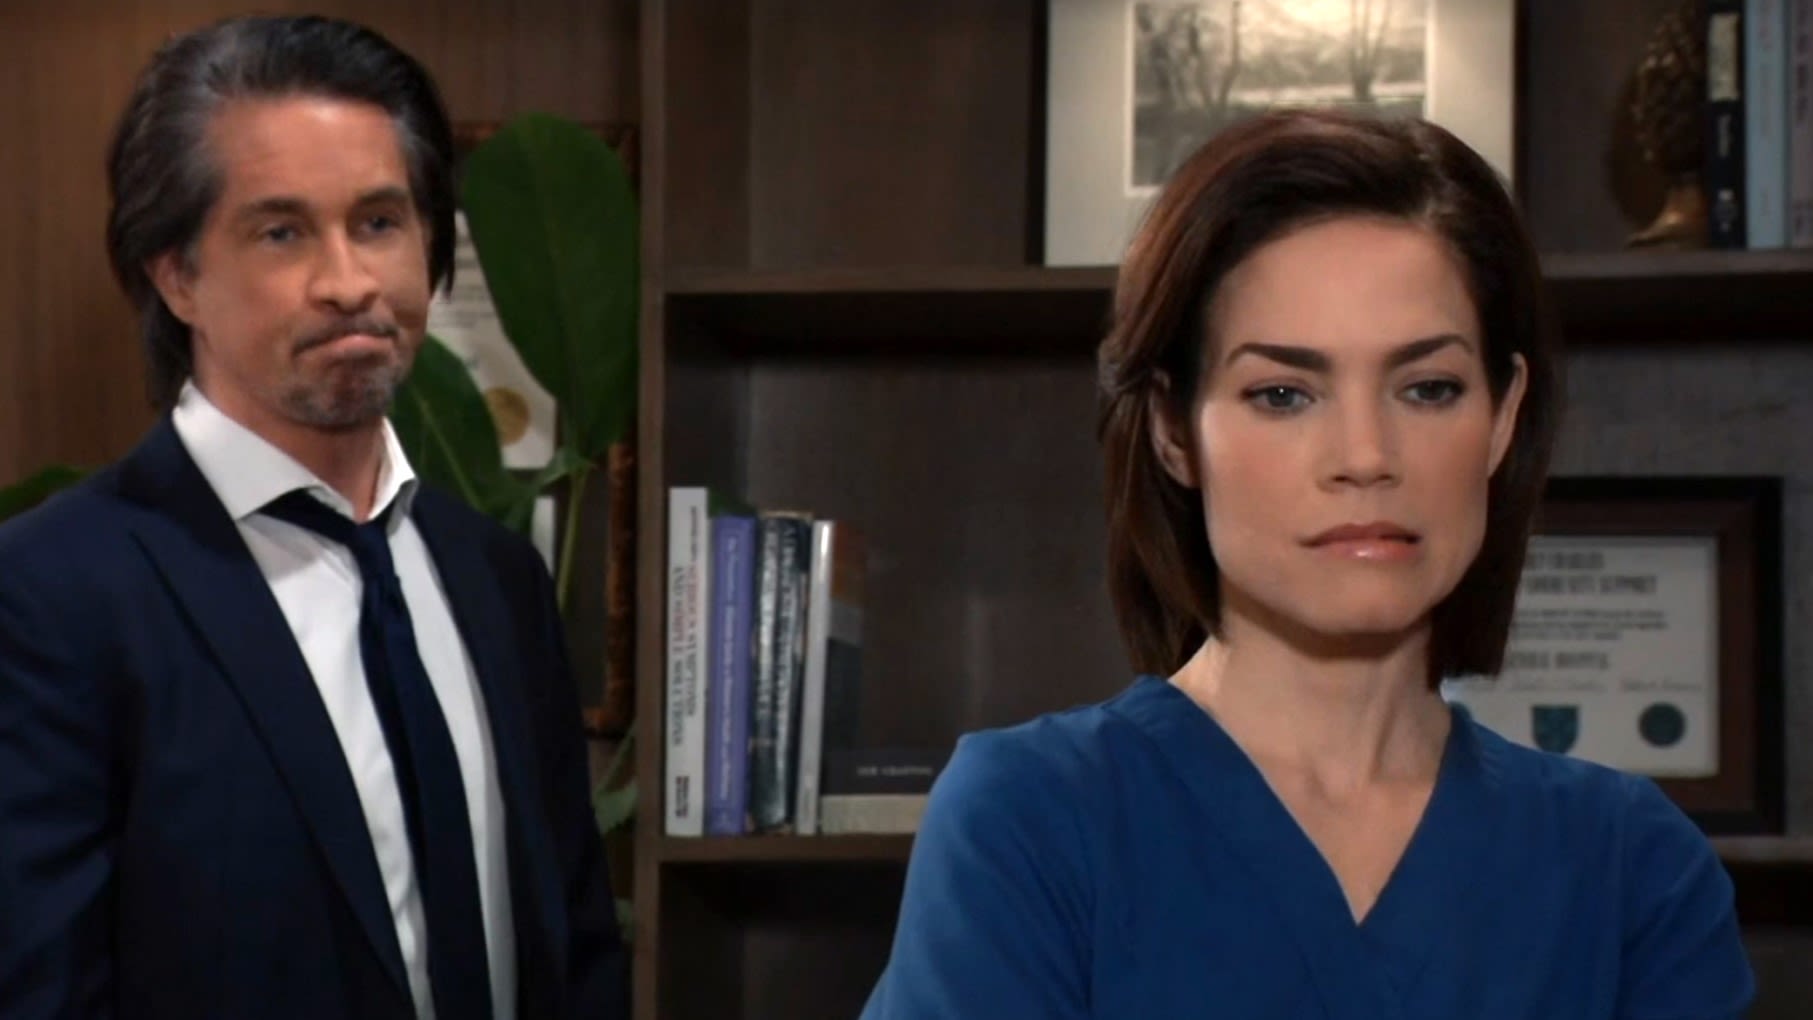 General Hospital spoilers: Finn’s relapse spells the end for him and Elizabeth?